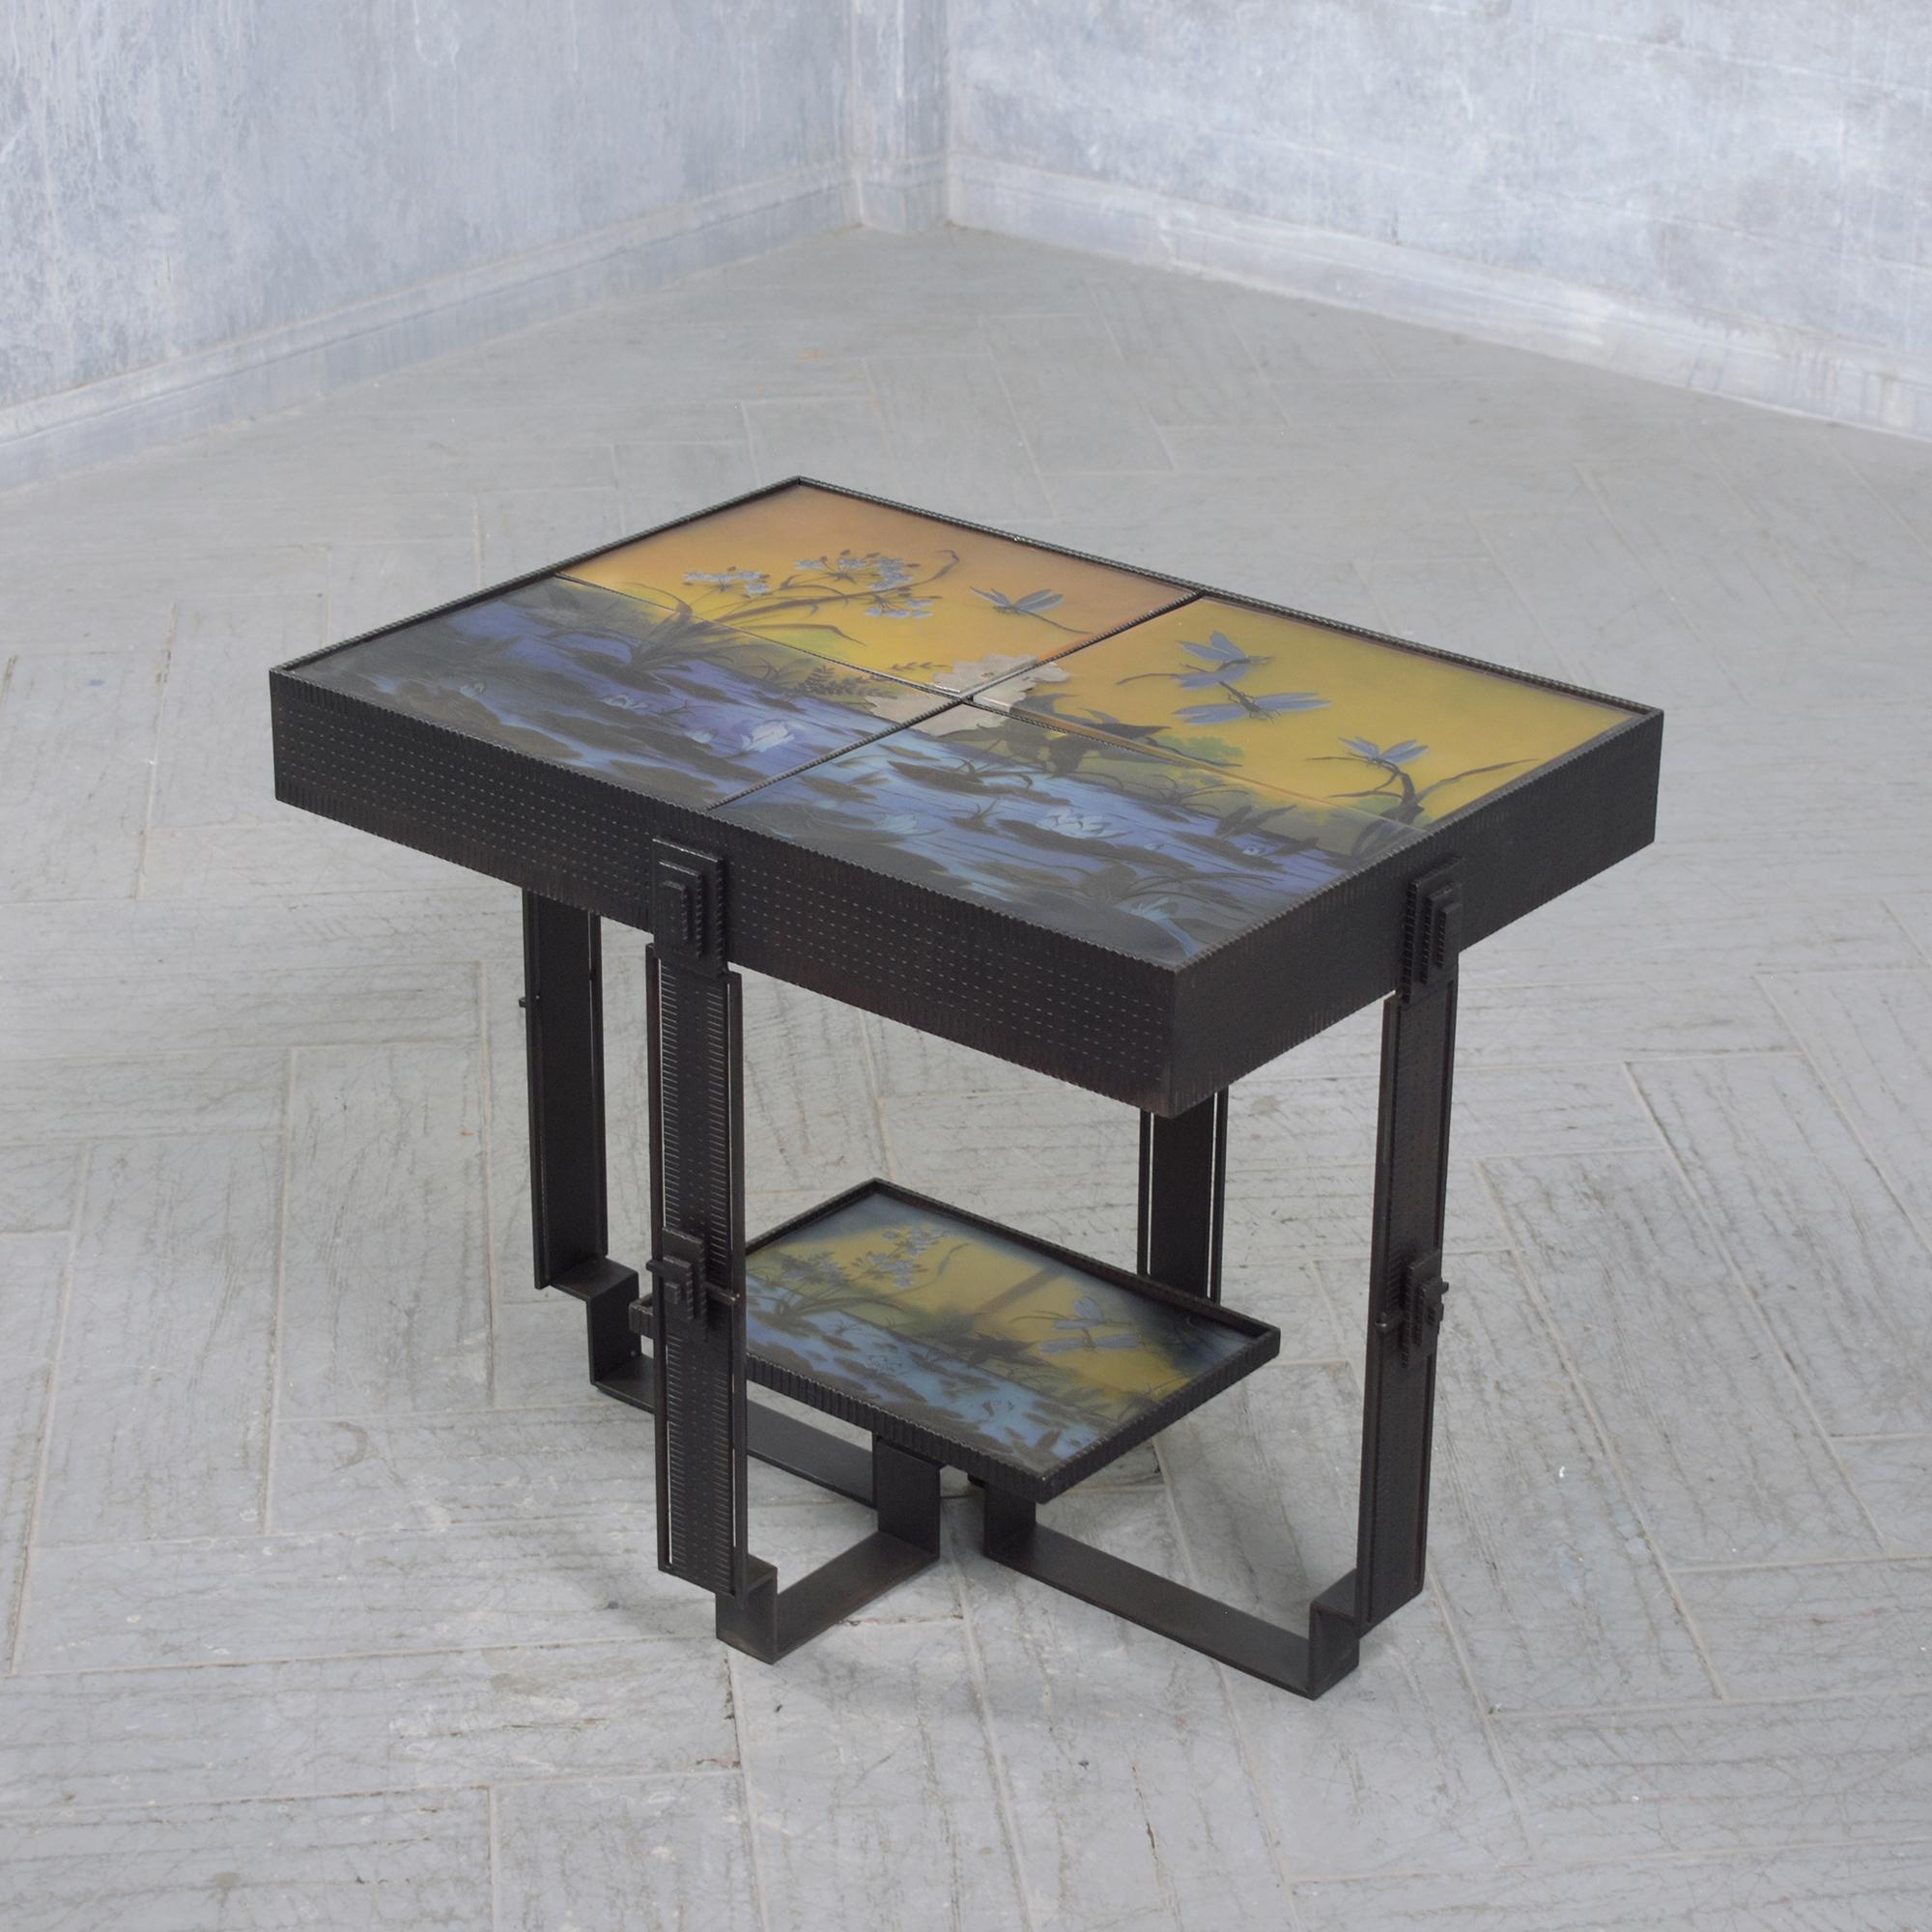 Vintage Art Deco Side Table: 1970s Iron & Glass Masterpiece In Good Condition For Sale In Los Angeles, CA